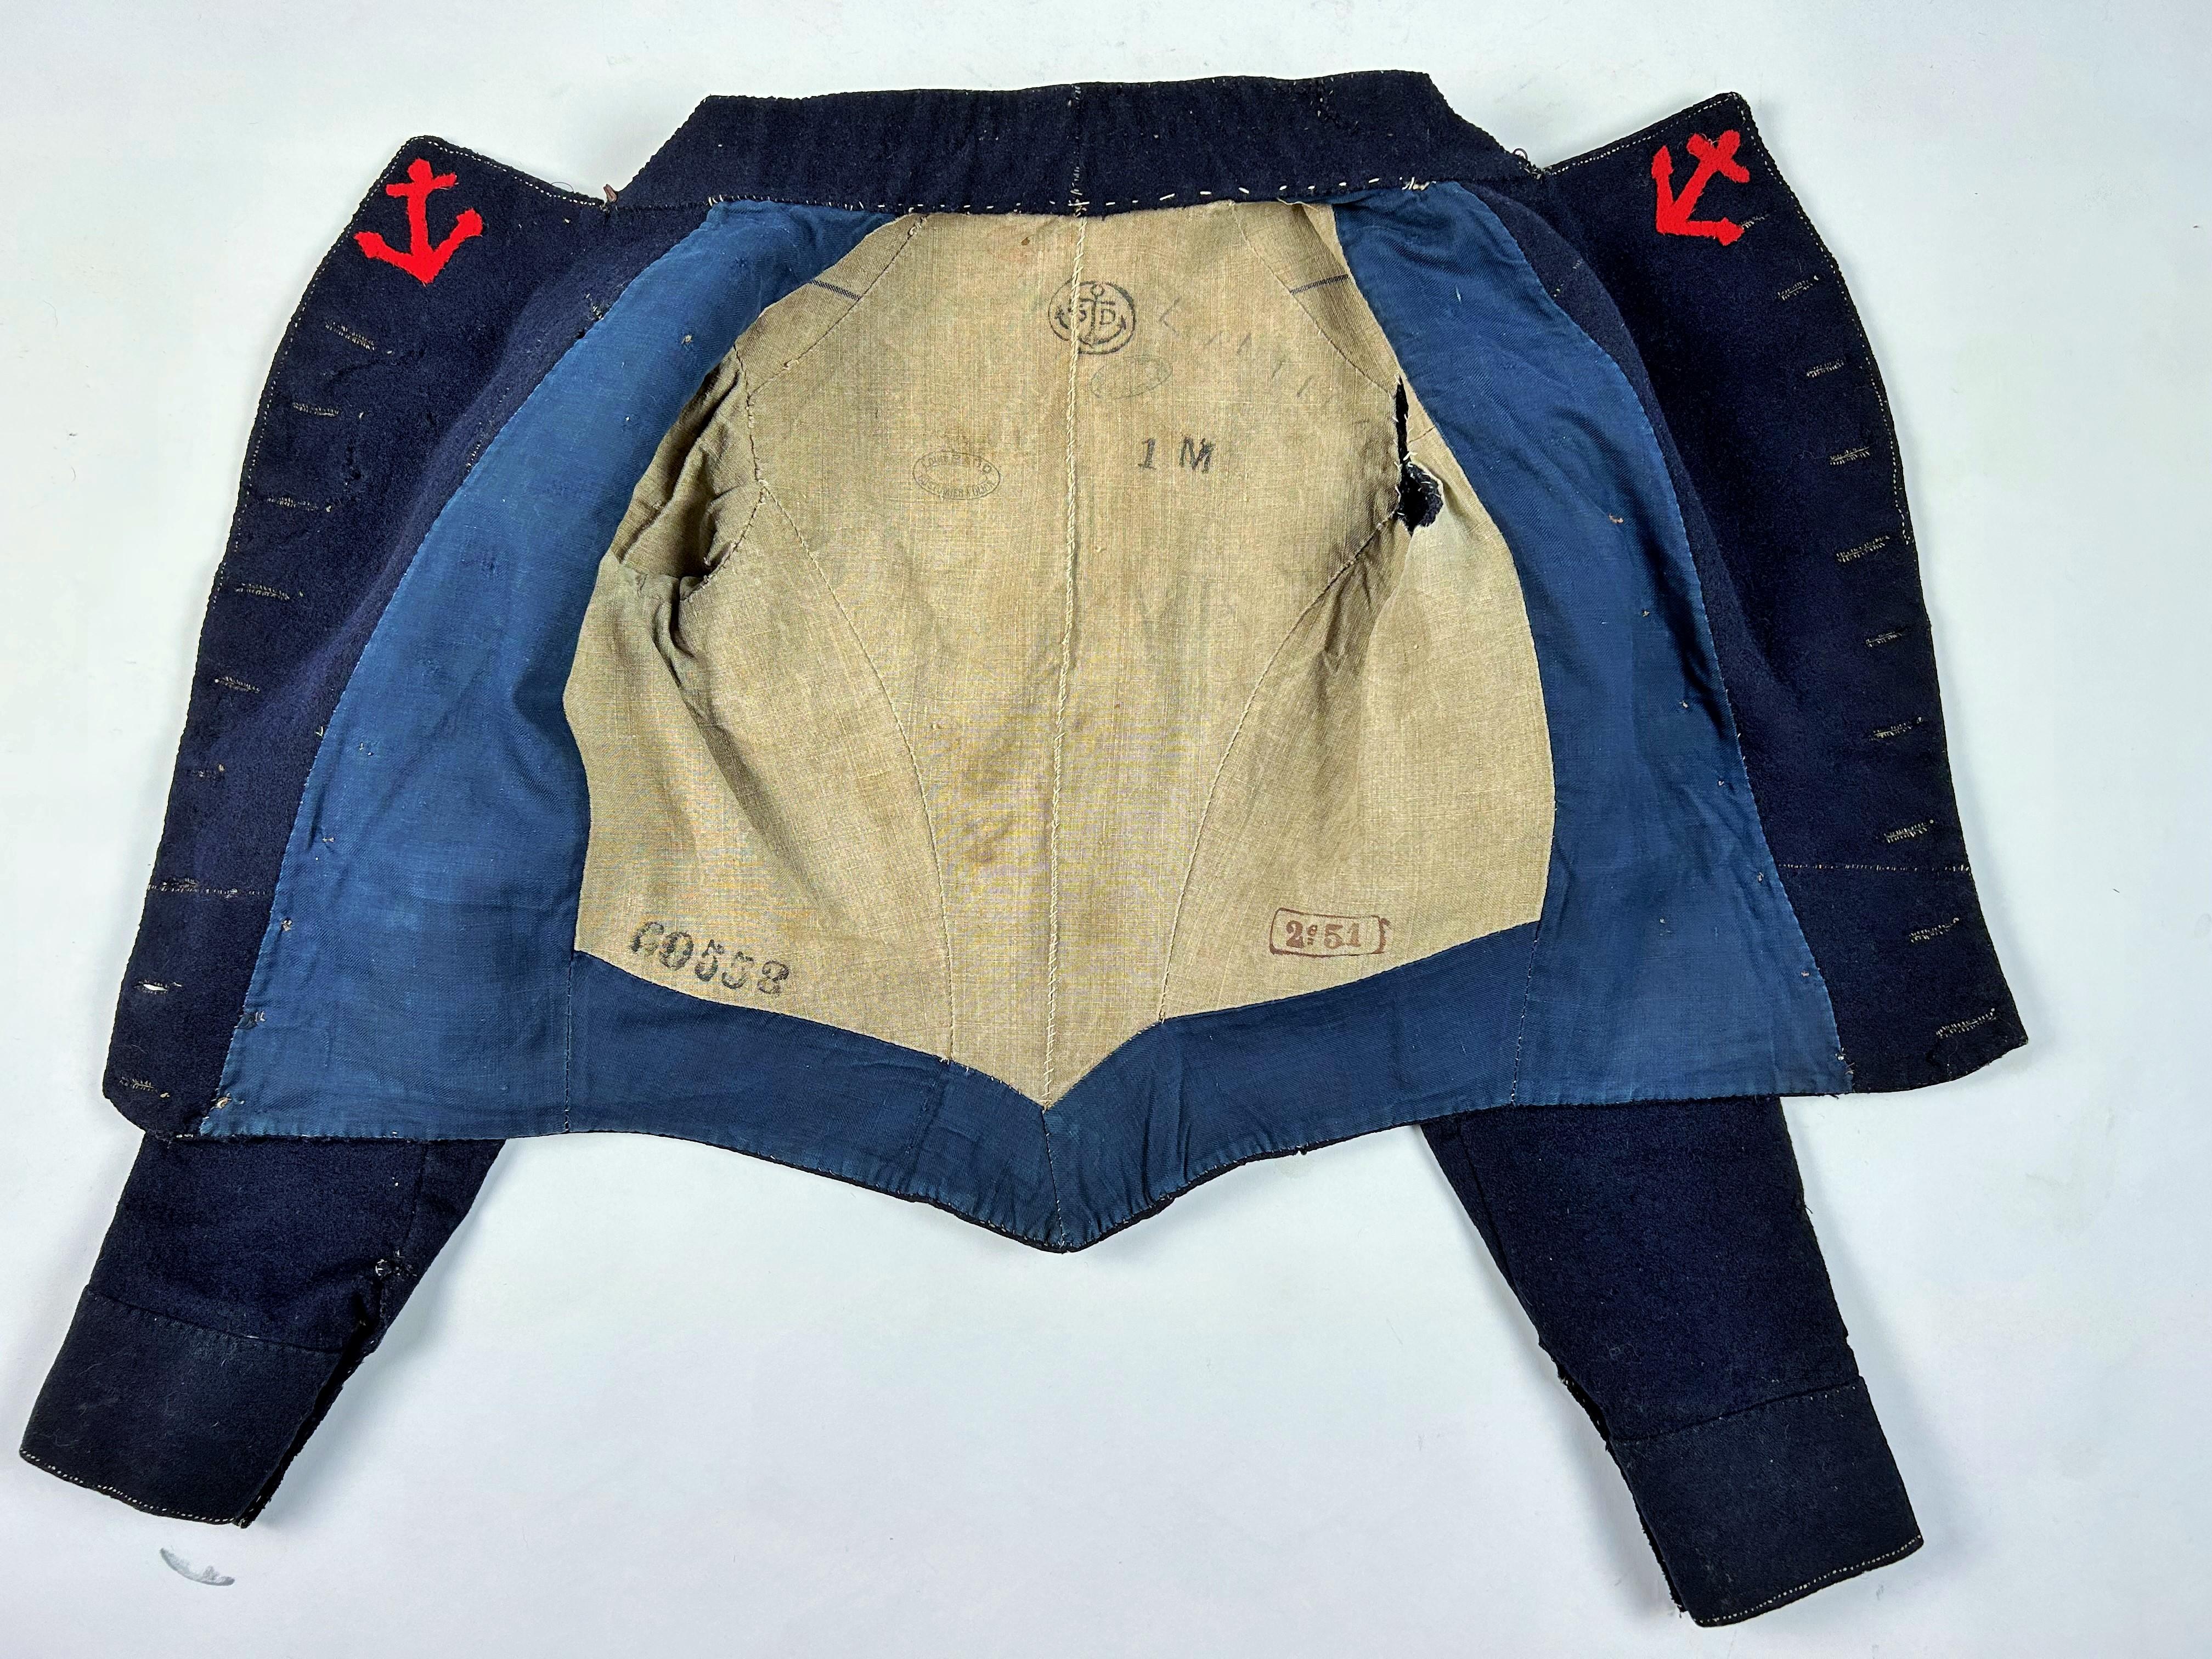 Circa 1851
France

A rare Troupe de Marin paletot jacket, model 1851, dating from the Monarchie de Juillet. Navy woollen cloth with eleven brass buttons engraved with a naval anchor and the inscription Equipage de ligne. The lapels are trimmed with